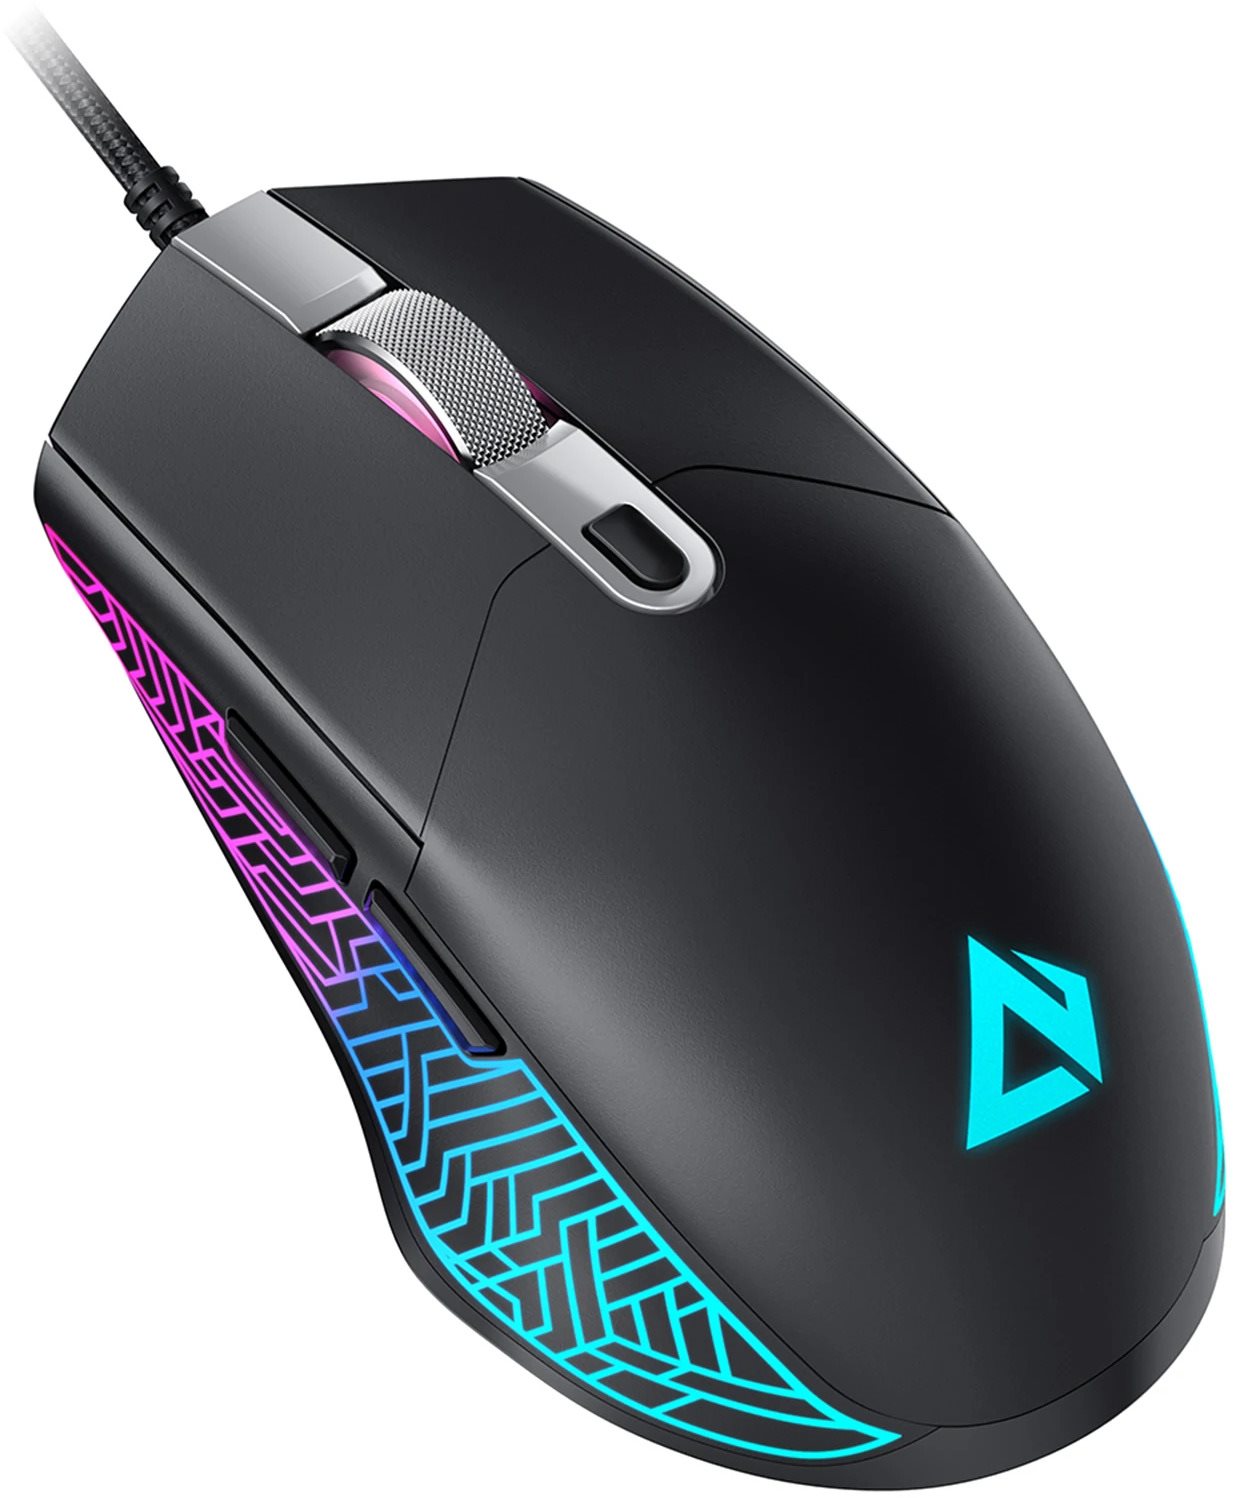 Aukey RGB Wired Gaming Mouse